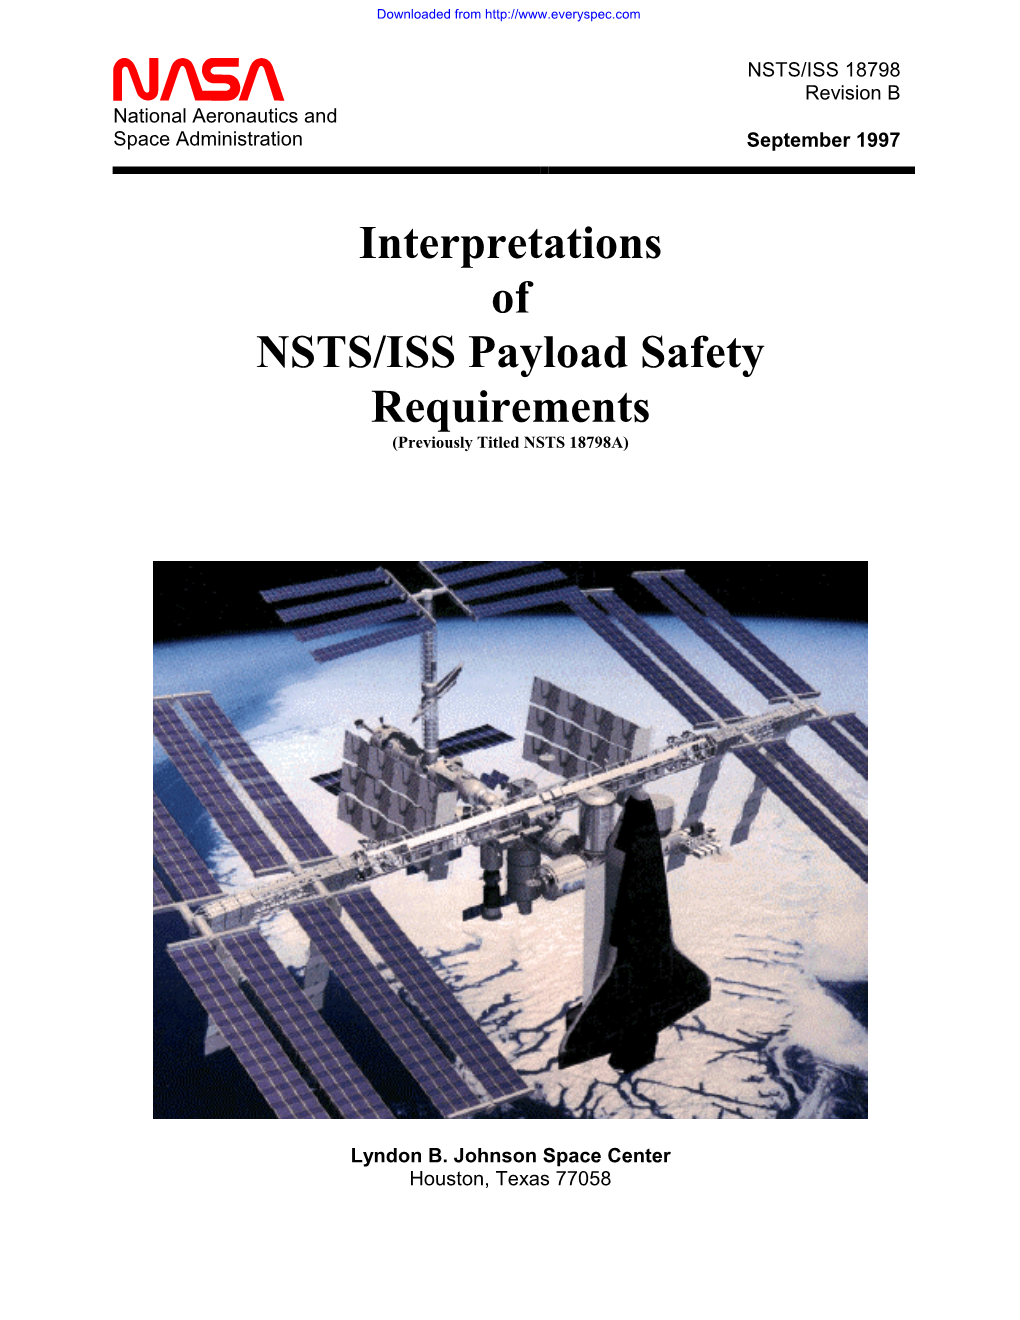 Interpretations of NSTS/ISS Payload Safety Requirements (Previously Titled NSTS 18798A)